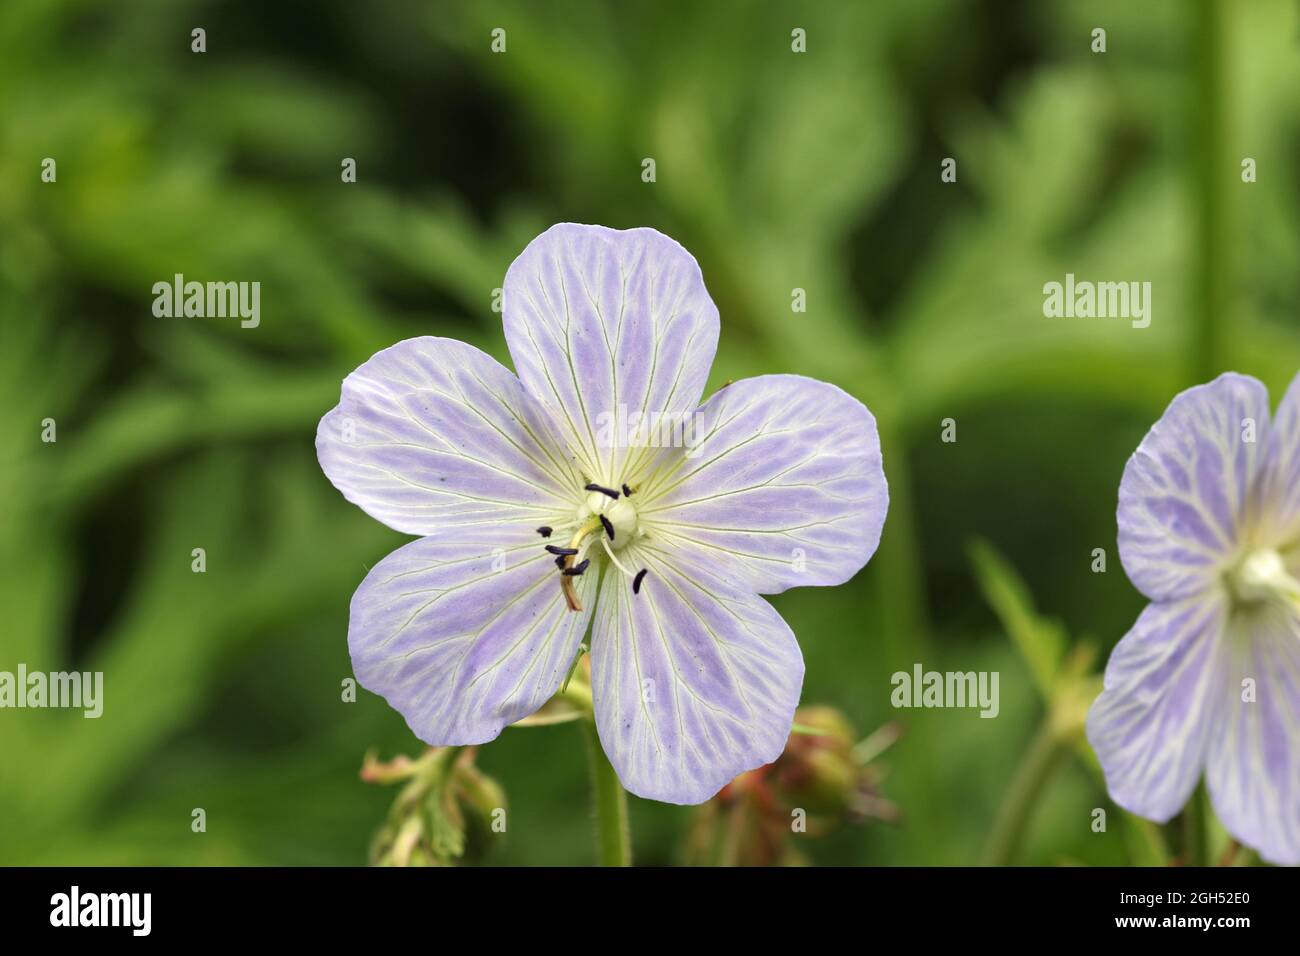 Violet cranesbill with white marked veins, unknown Geranium species, flower in close up with a background of blurred leaves. Stock Photo